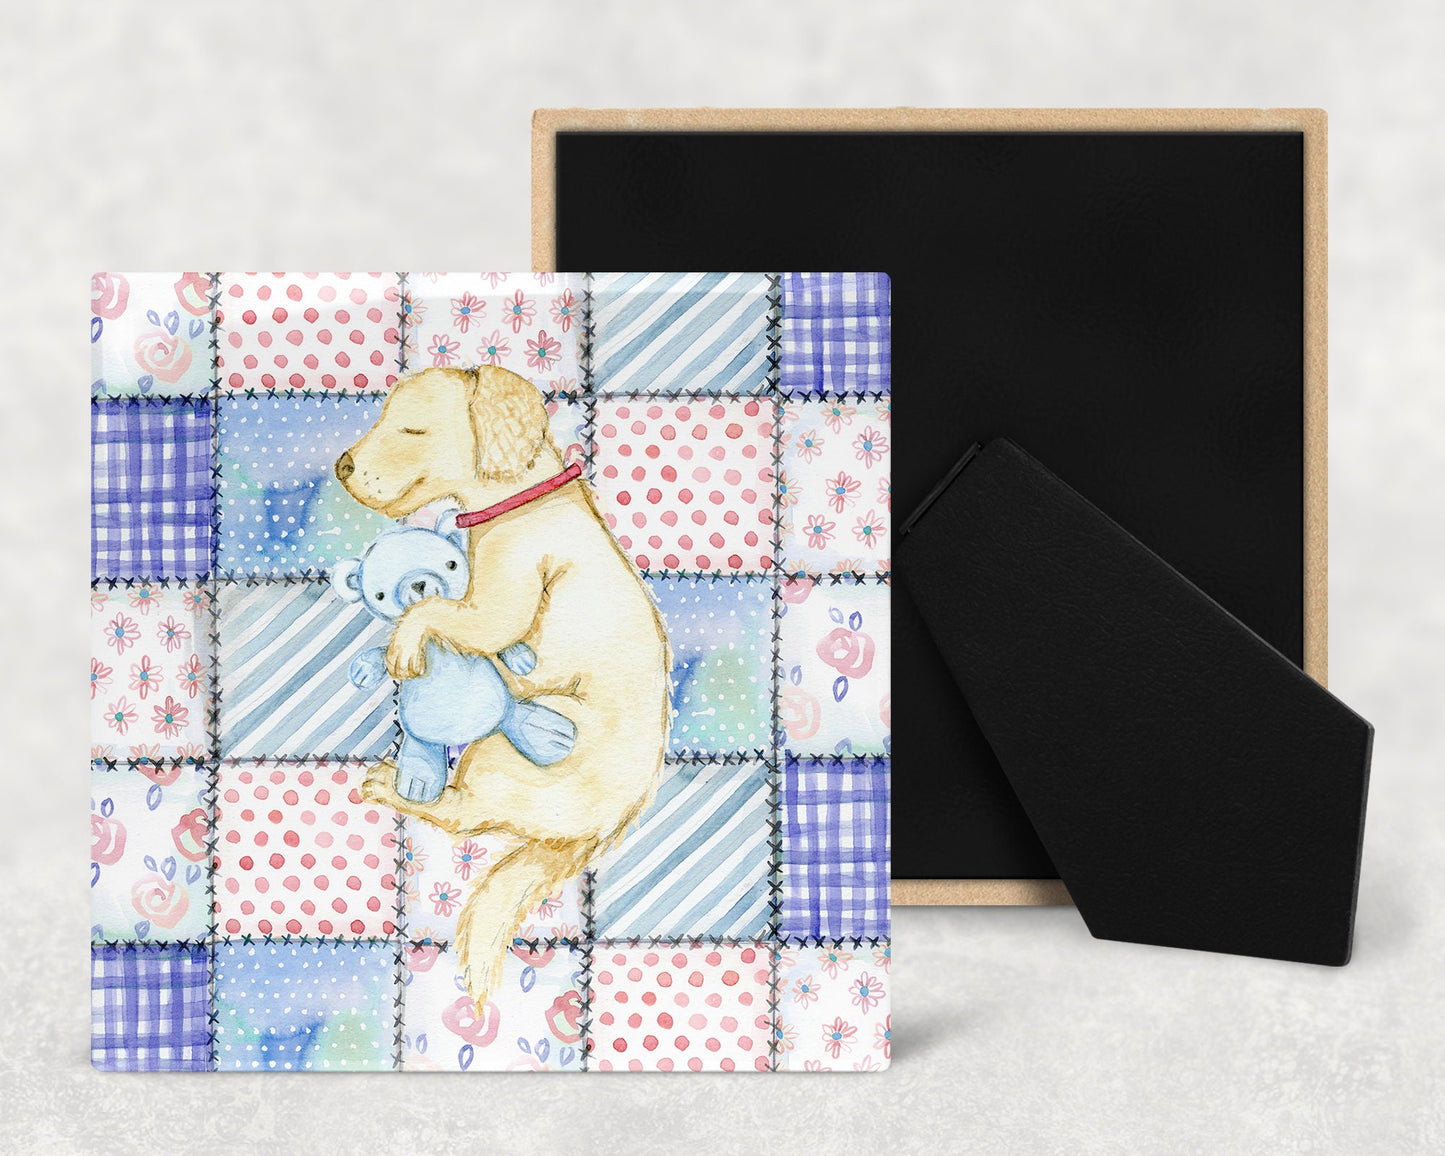 Cute Sleeping Puppy Quilt Pattern Art Decorative Ceramic Tile with Optional Easel Back - Available in 3 Sizes